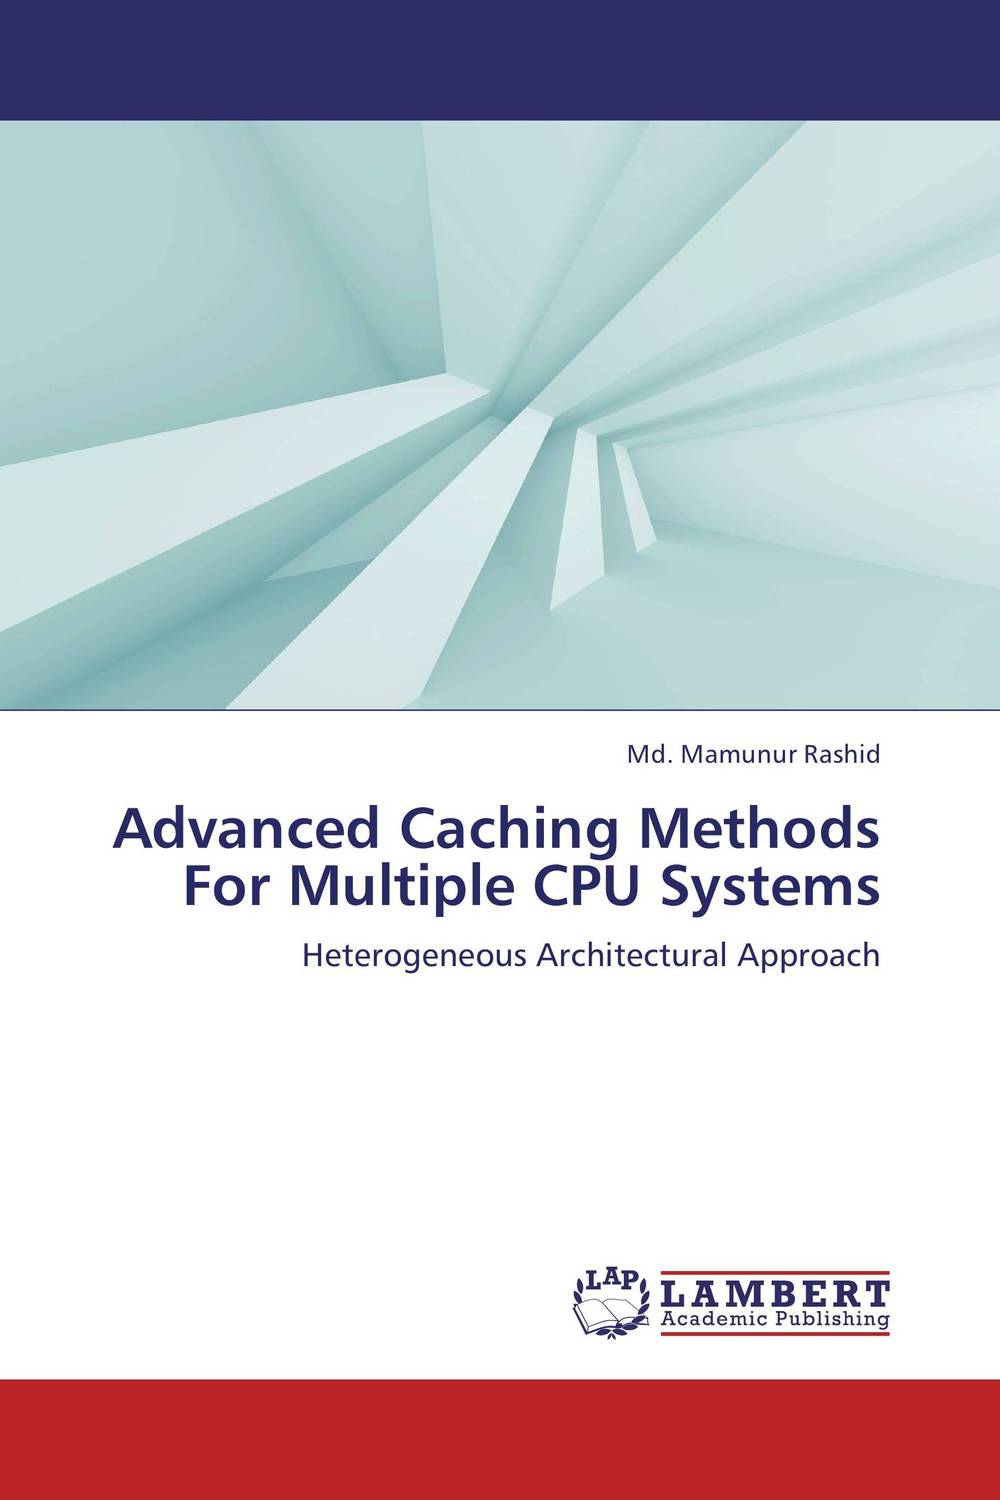 Advanced Caching Methods For Multiple CPU Systems